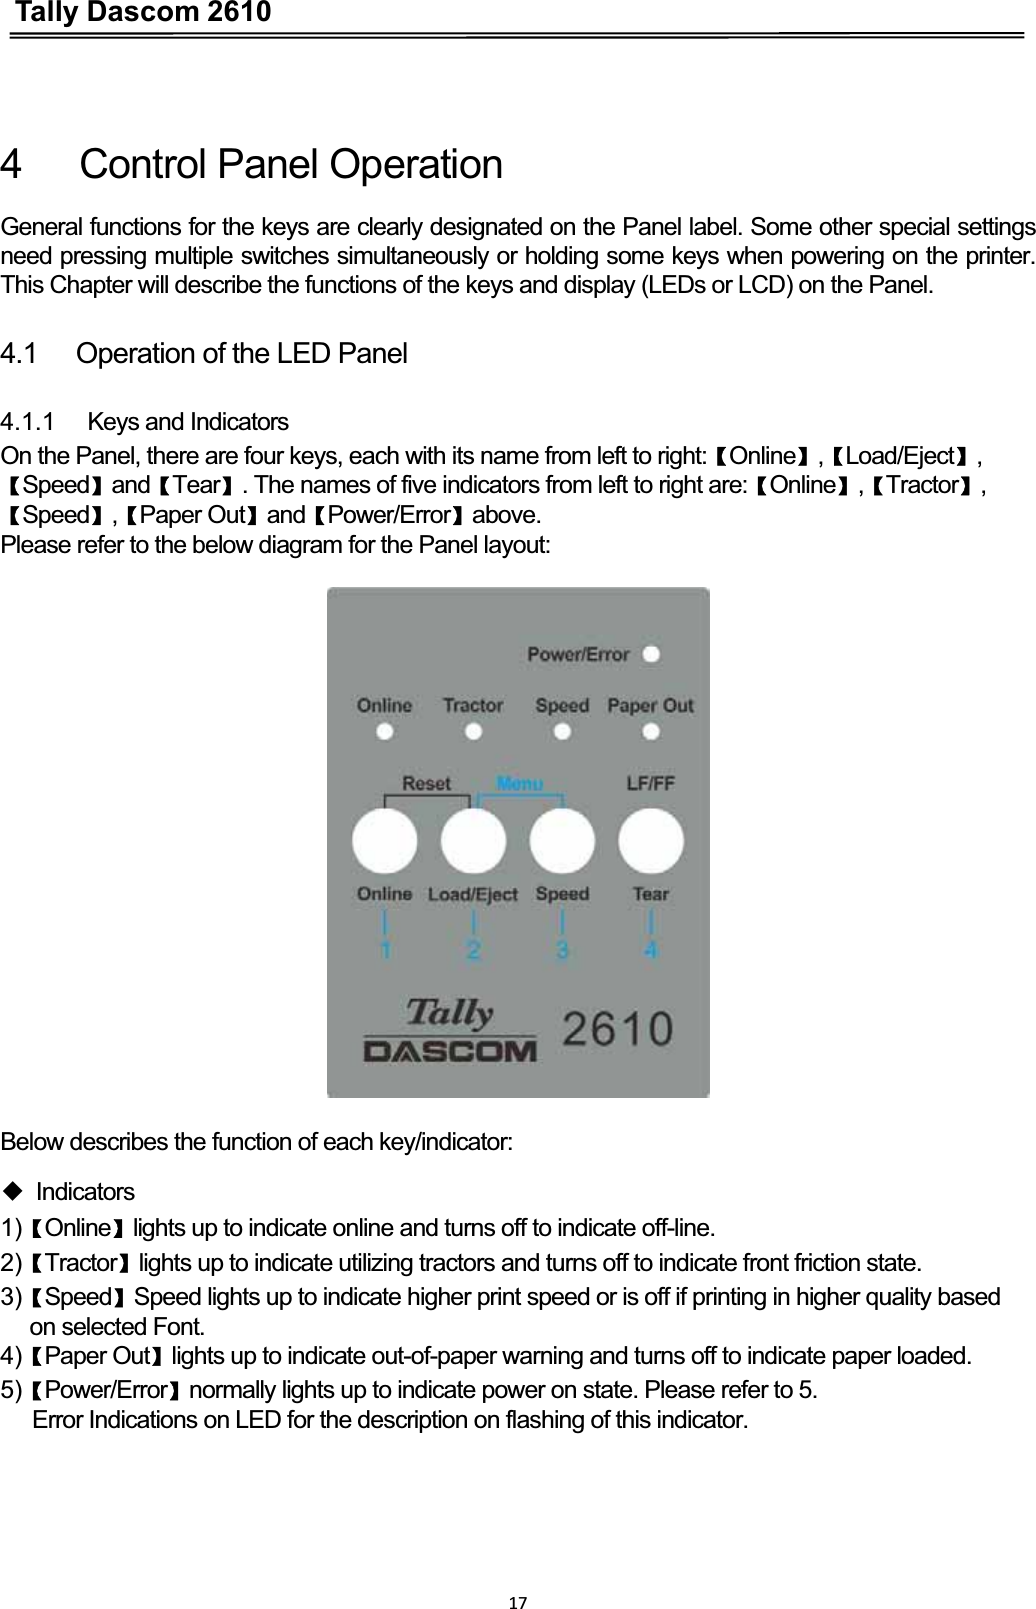 Tally Dascom 2610174   Control Panel Operation  General functions for the keys are clearly designated on the Panel label. Some other special settings need pressing multiple switches simultaneously or holding some keys when powering on the printer. This Chapter will describe the functions of the keys and display (LEDs or LCD) on the Panel. 4.1   Operation of the LED Panel 4.1.1   Keys and Indicators On the Panel, there are four keys, each with its name from left to right:ɋOnlineɌ,ɋLoad/EjectɌ,ɋSpeedɌandɋTearɌ. The names of five indicators from left to right are:ɋOnlineɌ,ɋTractorɌ,ɋSpeedɌ,ɋPaper OutɌandɋPower/ErrorɌabove.Please refer to the below diagram for the Panel layout:   Below describes the function of each key/indicator:   ƹ Indicators  1)ɋOnlineɌlights up to indicate online and turns off to indicate off-line. 2)ɋTractorɌlights up to indicate utilizing tractors and turns off to indicate front friction state. 3)ɋSpeedɌSpeed lights up to indicate higher print speed or is off if printing in higher quality based on selected Font. 4)ɋPaper OutɌlights up to indicate out-of-paper warning and turns off to indicate paper loaded. 5)ɋPower/ErrorɌnormally lights up to indicate power on state. Please refer to 5.   Error Indications on LED for the description on flashing of this indicator. 